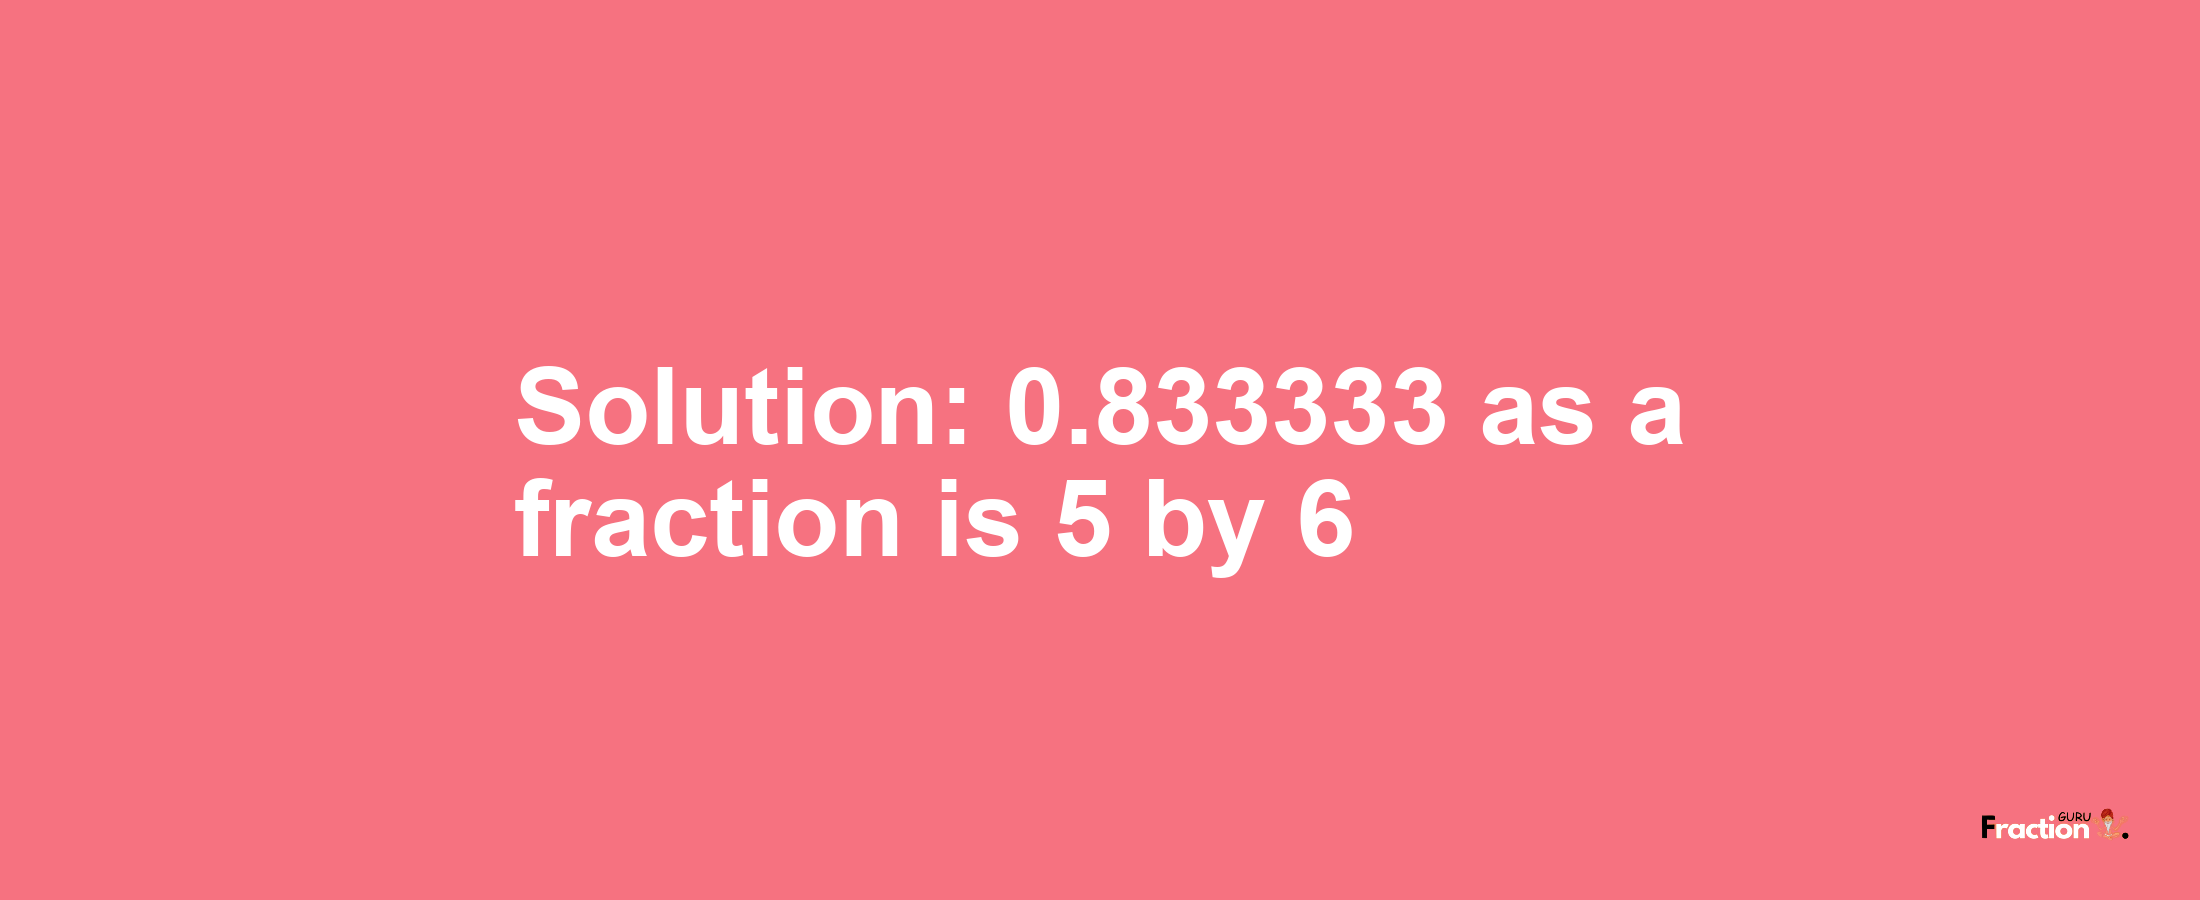 Solution:0.833333 as a fraction is 5/6